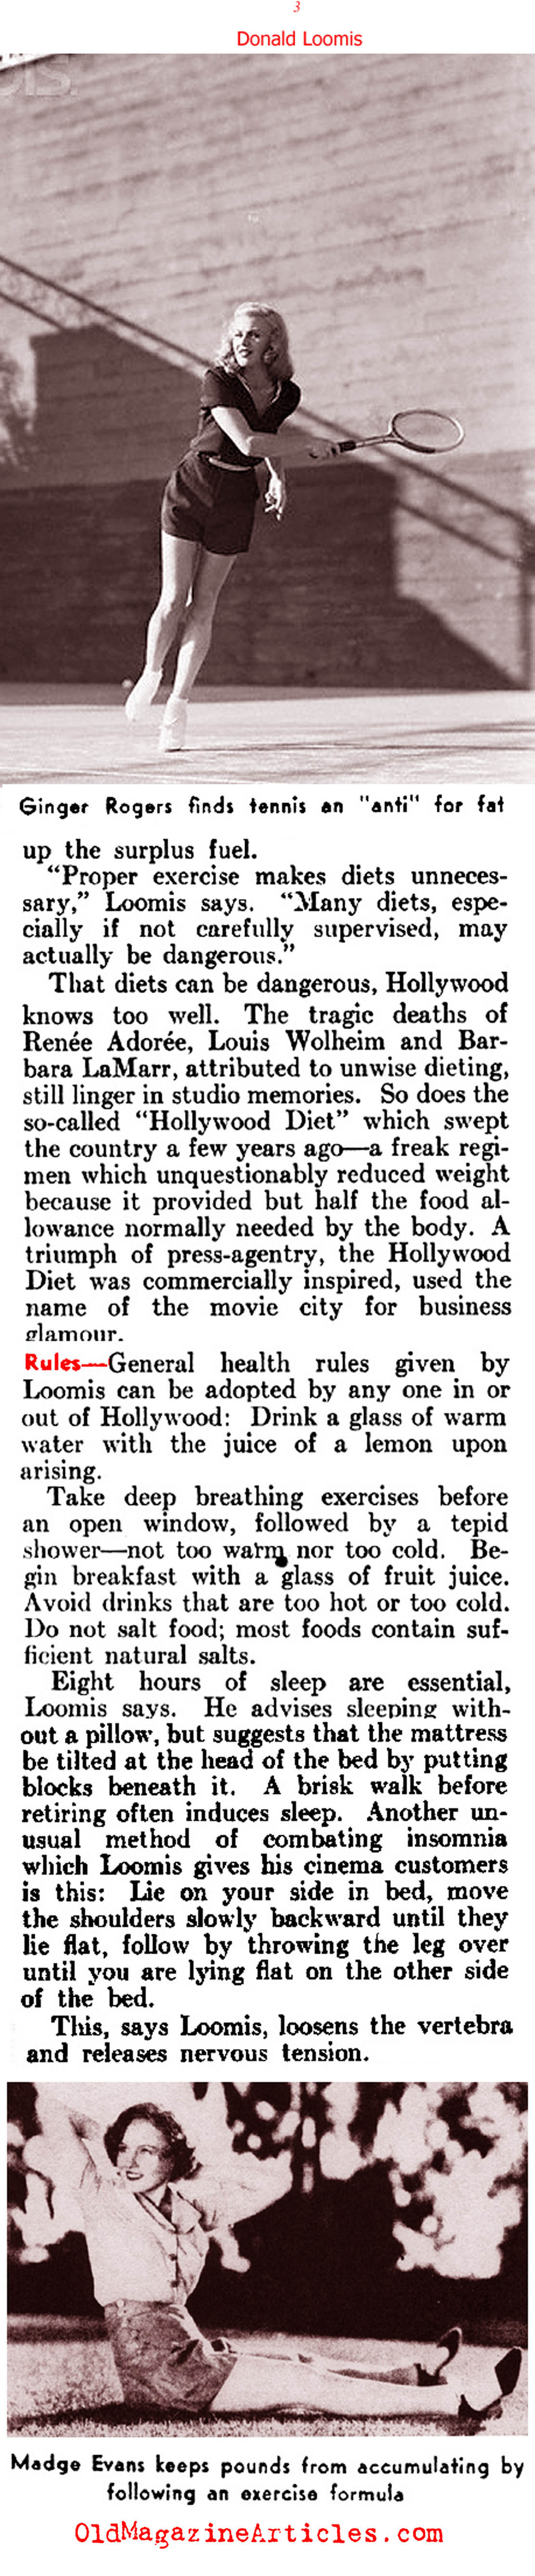 The Old Hollywood Way to Physical Perfection (Literary Digest, 1937)